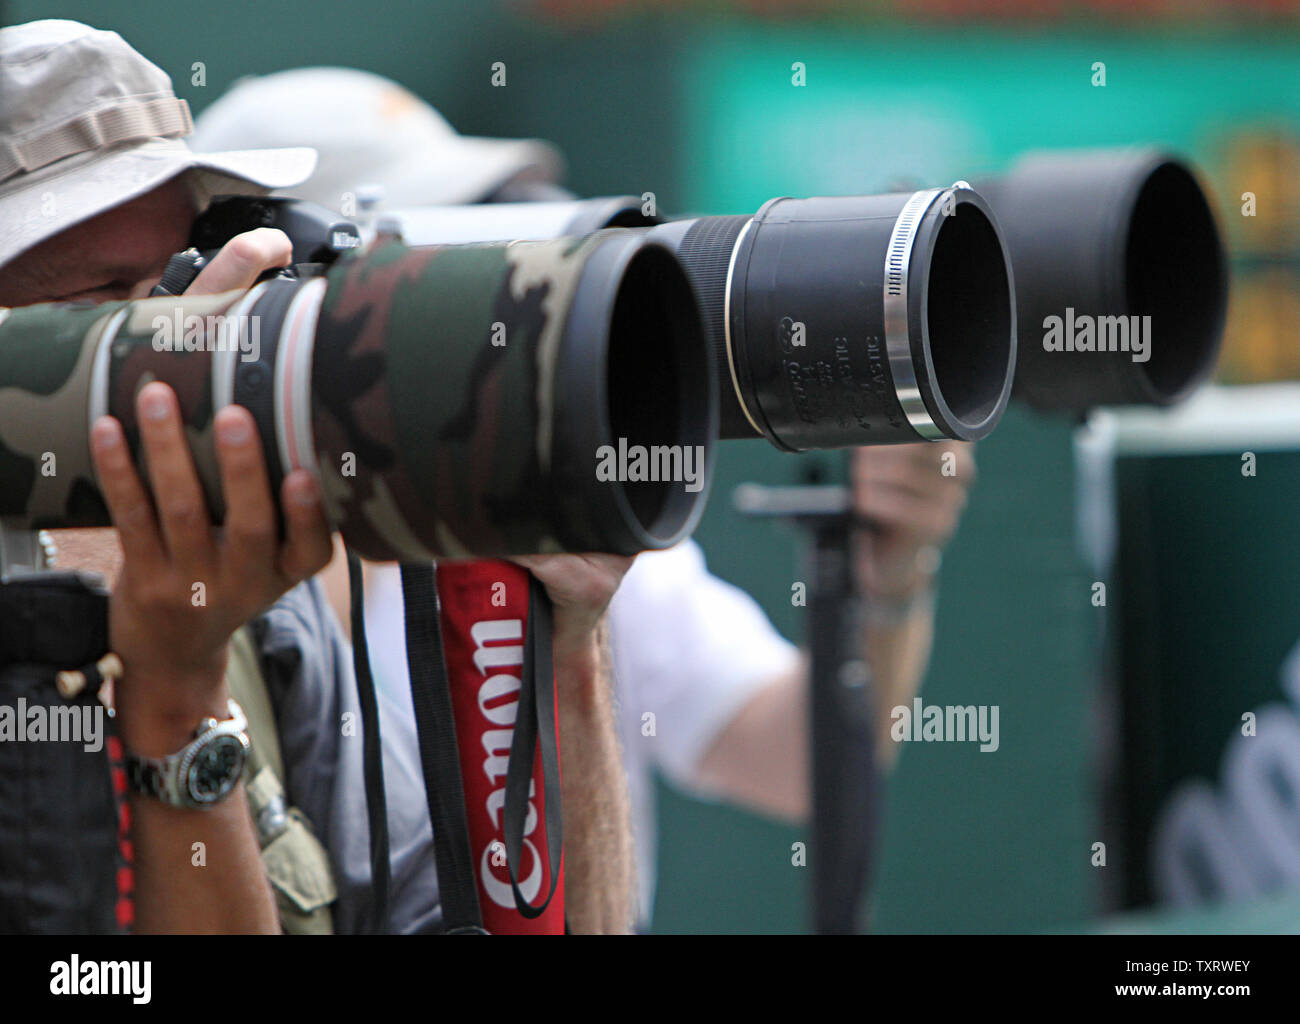 Photographers are seen shooting the mens final match between Spaniard Rafael Nadal and Serbian Novak Djokovic at the BNP Paribas Open in Indian Wells, California on March 20, 2011.  Djokovic defeated Nadal 4-6, 6-3, 6-2 to win the tournament.   UPI/David Silpa Stock Photo